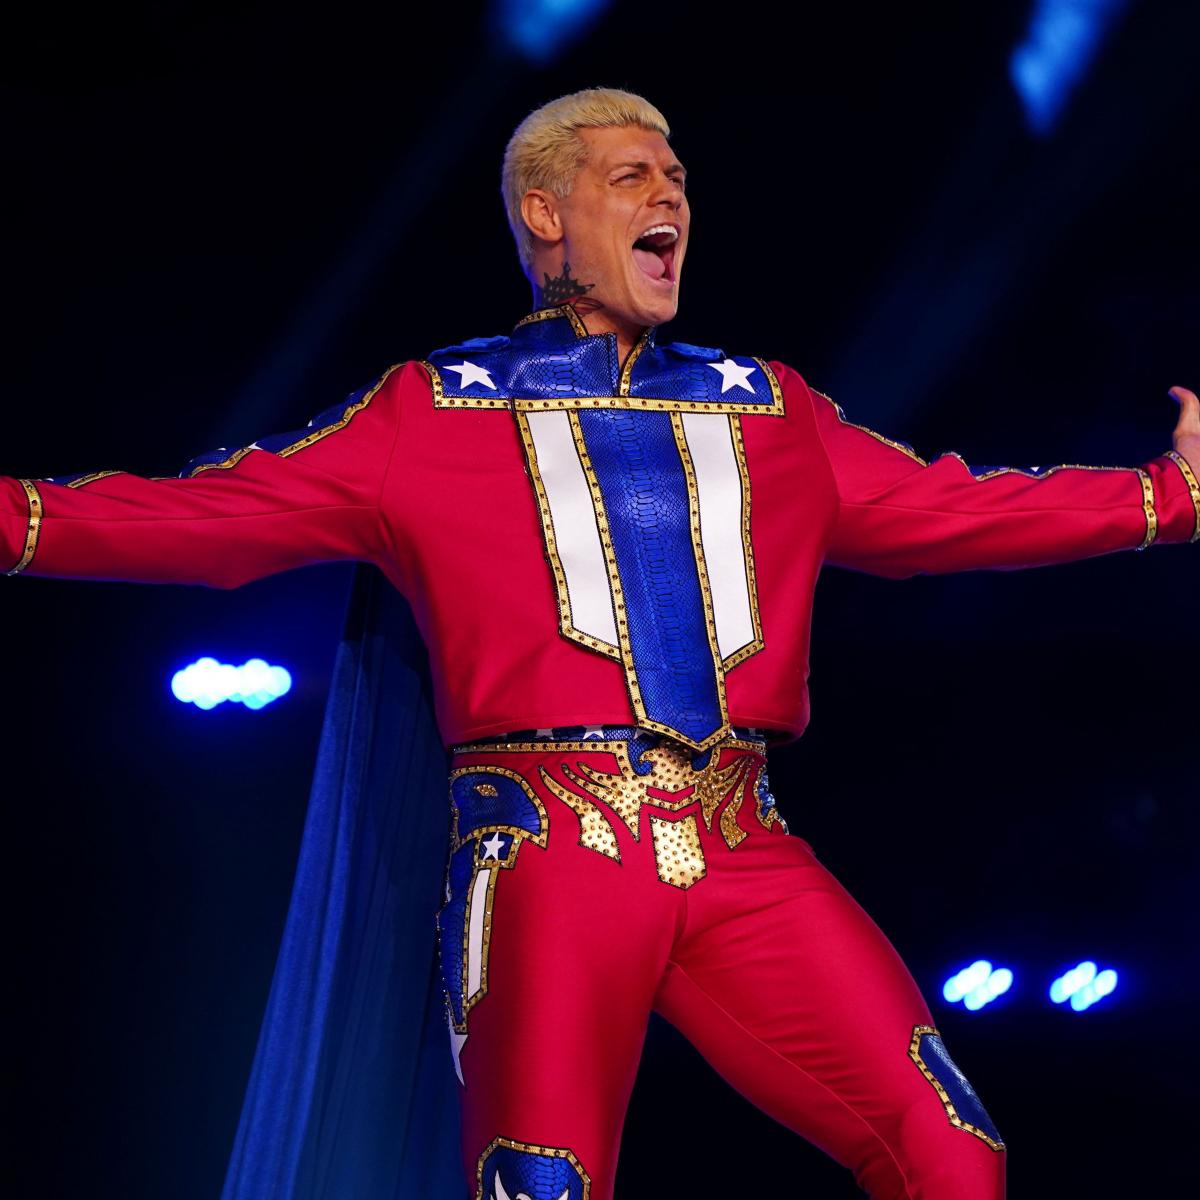 How Does Cody Rhodes Reverse Trend After Being Booed at AEW Mountainous Slam?